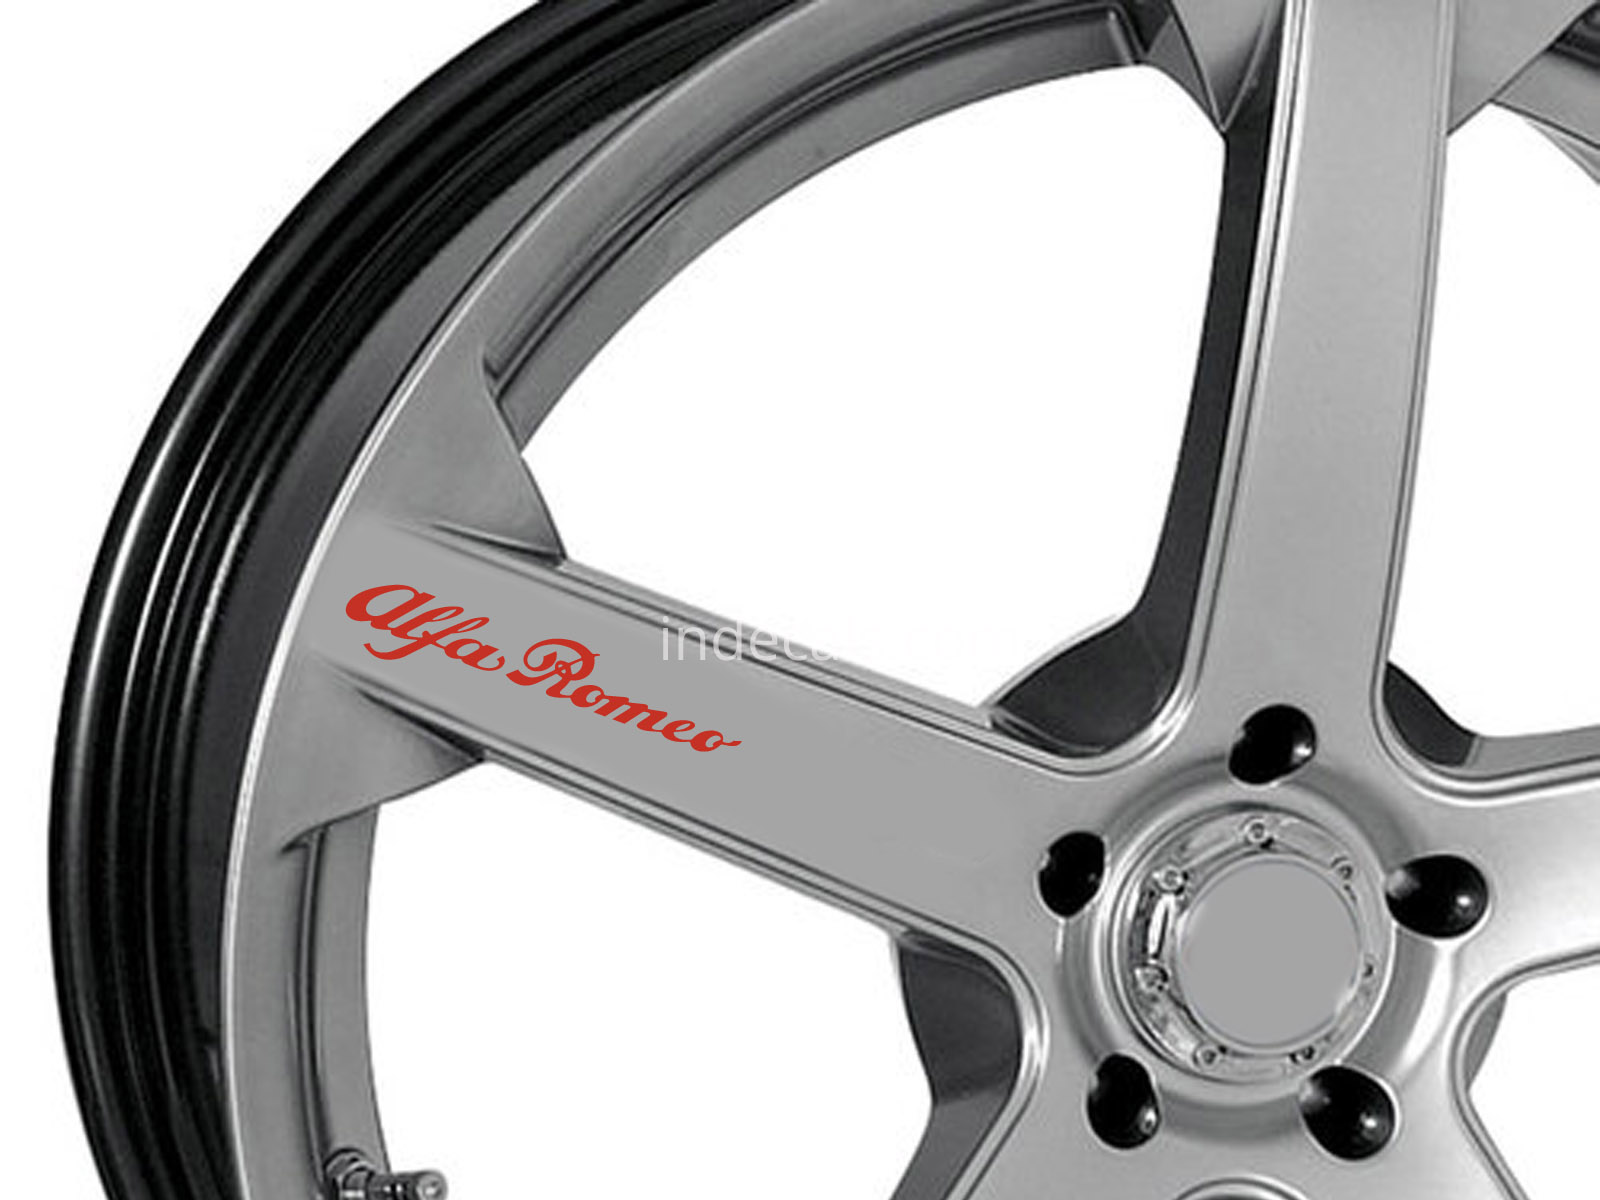 6 x Alfa Romeo Stickers for Wheels - Red